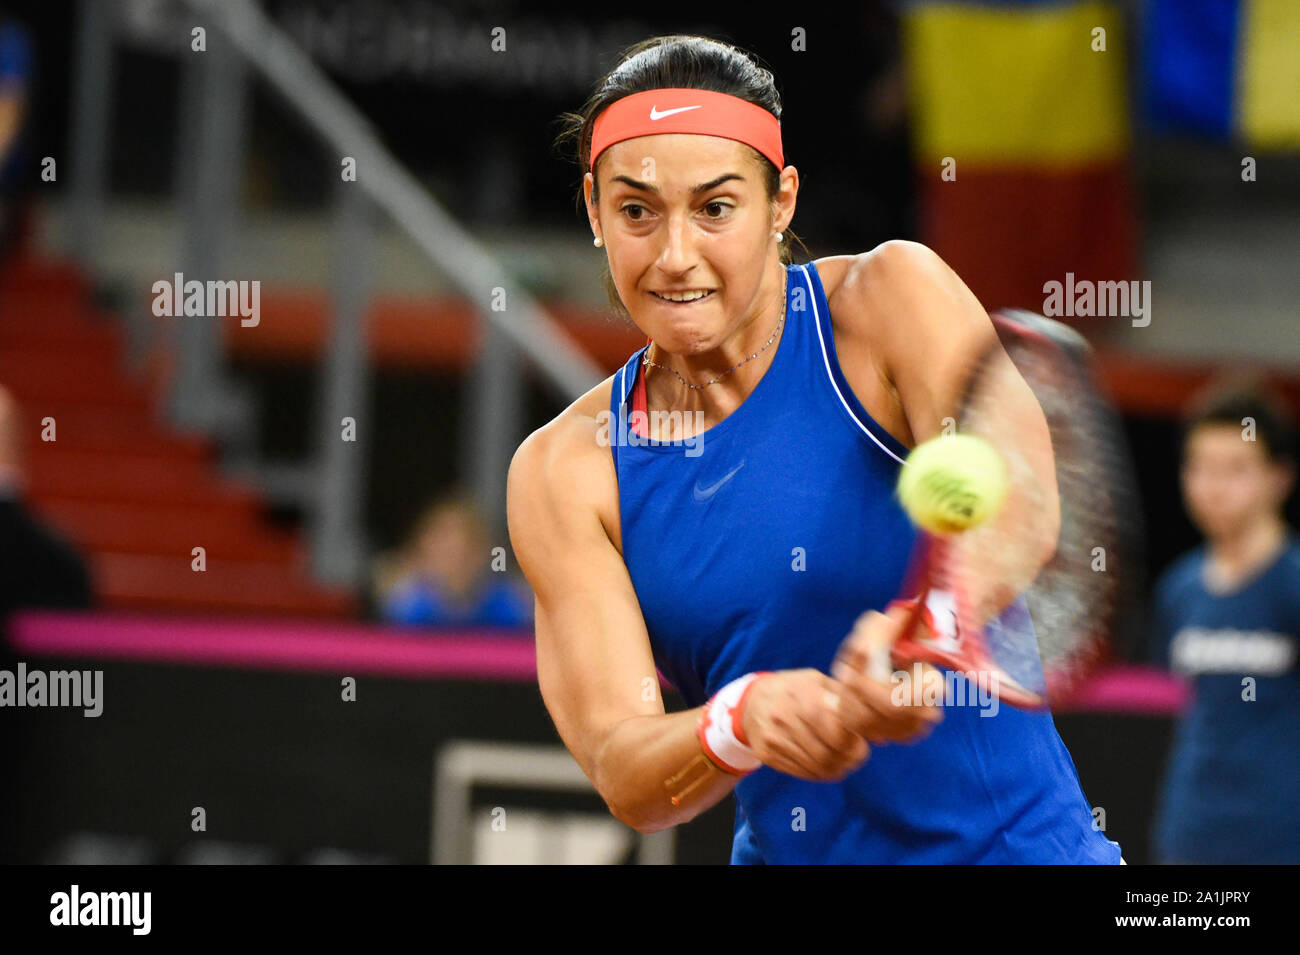 Rouen (Normandy, north-western France), April 20th and 21st, 2019: the French women’s tennis team is qualified for the Fed Cup final after winning aga Stock Photo